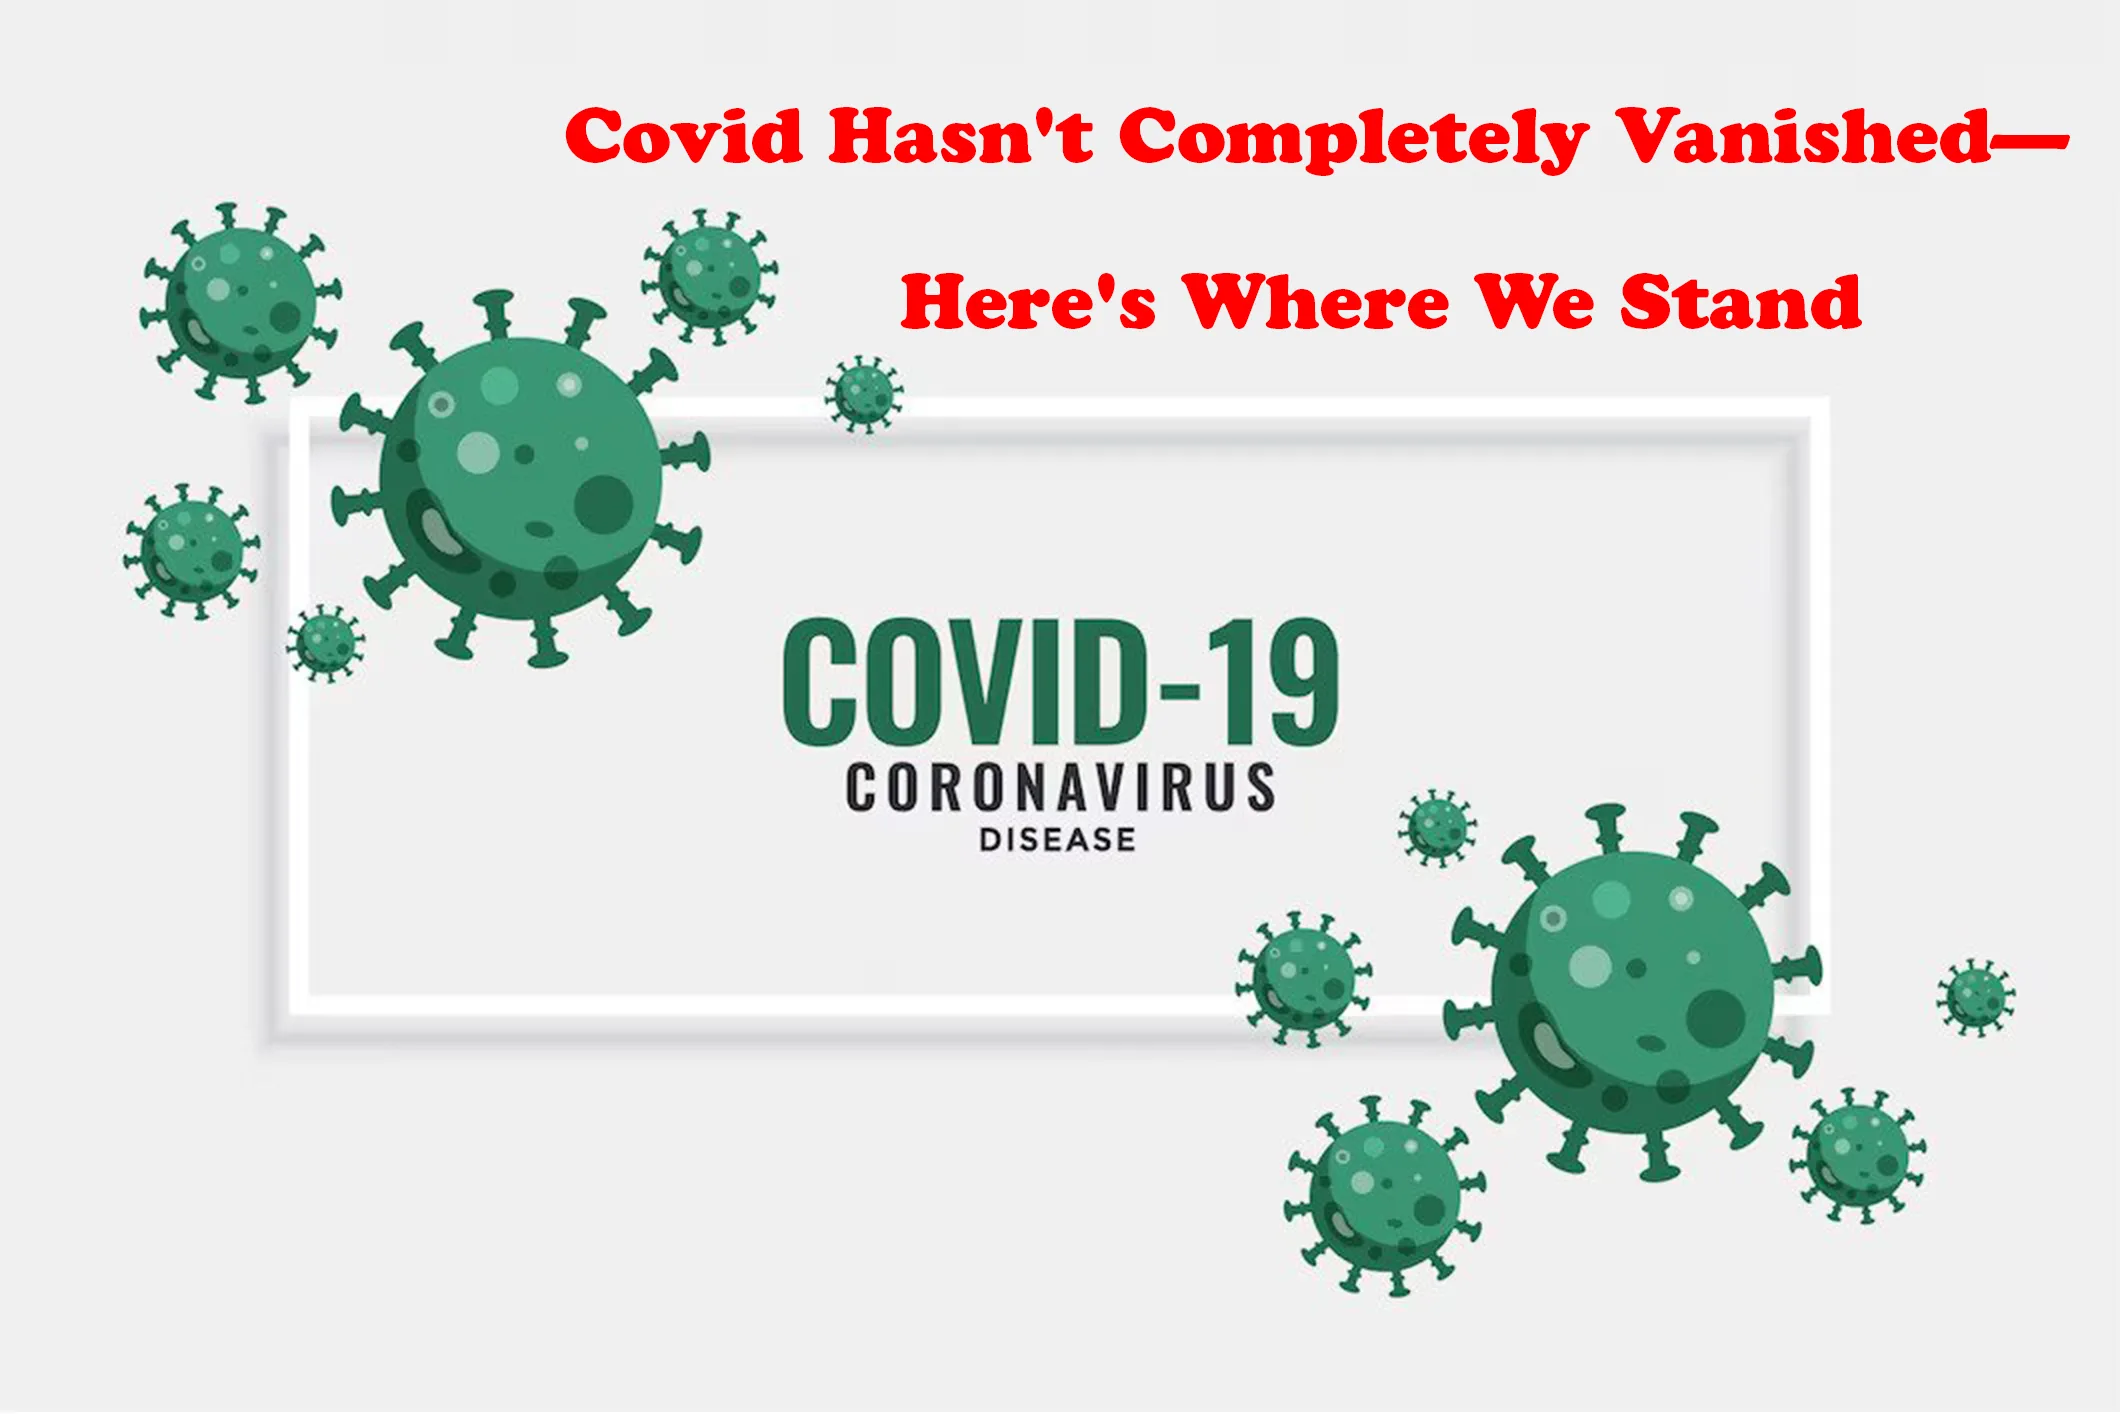 Covid Hasn’t Completely Vanished—Here’s Where We Stand